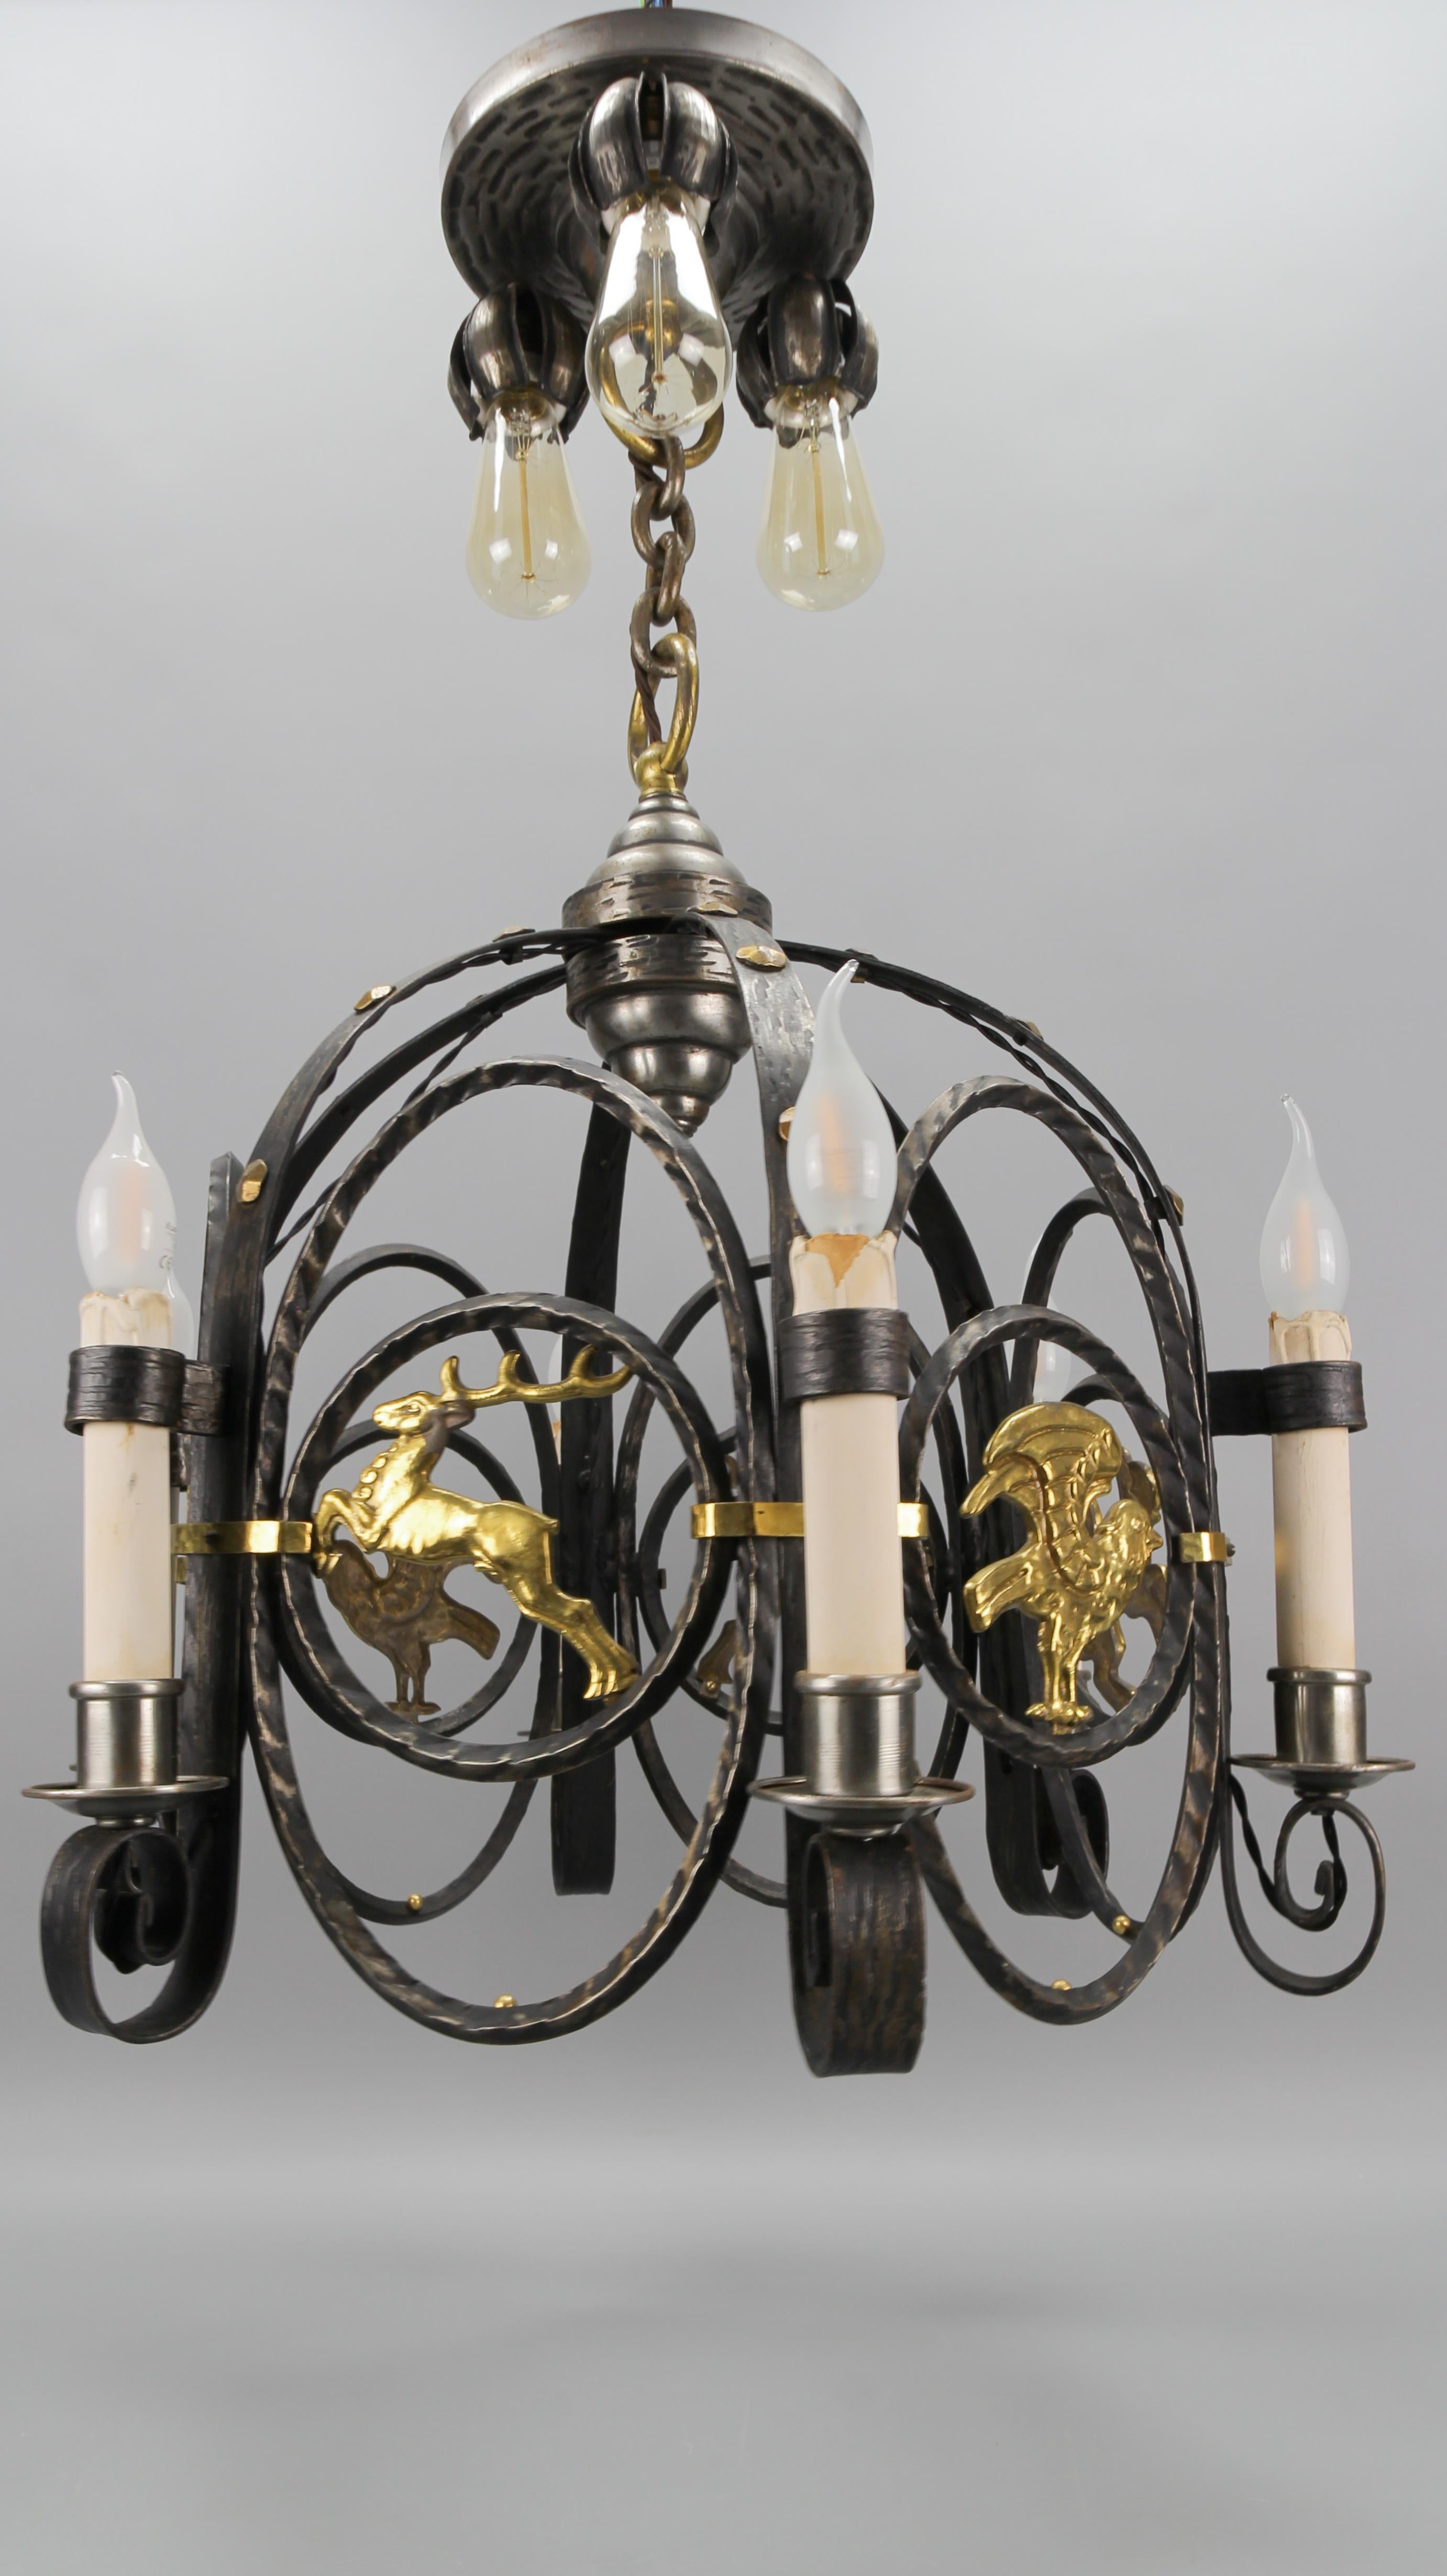 German Art Deco Nine-Light Wrought Iron and Brass Chandelier with Animals, 1920s For Sale 8